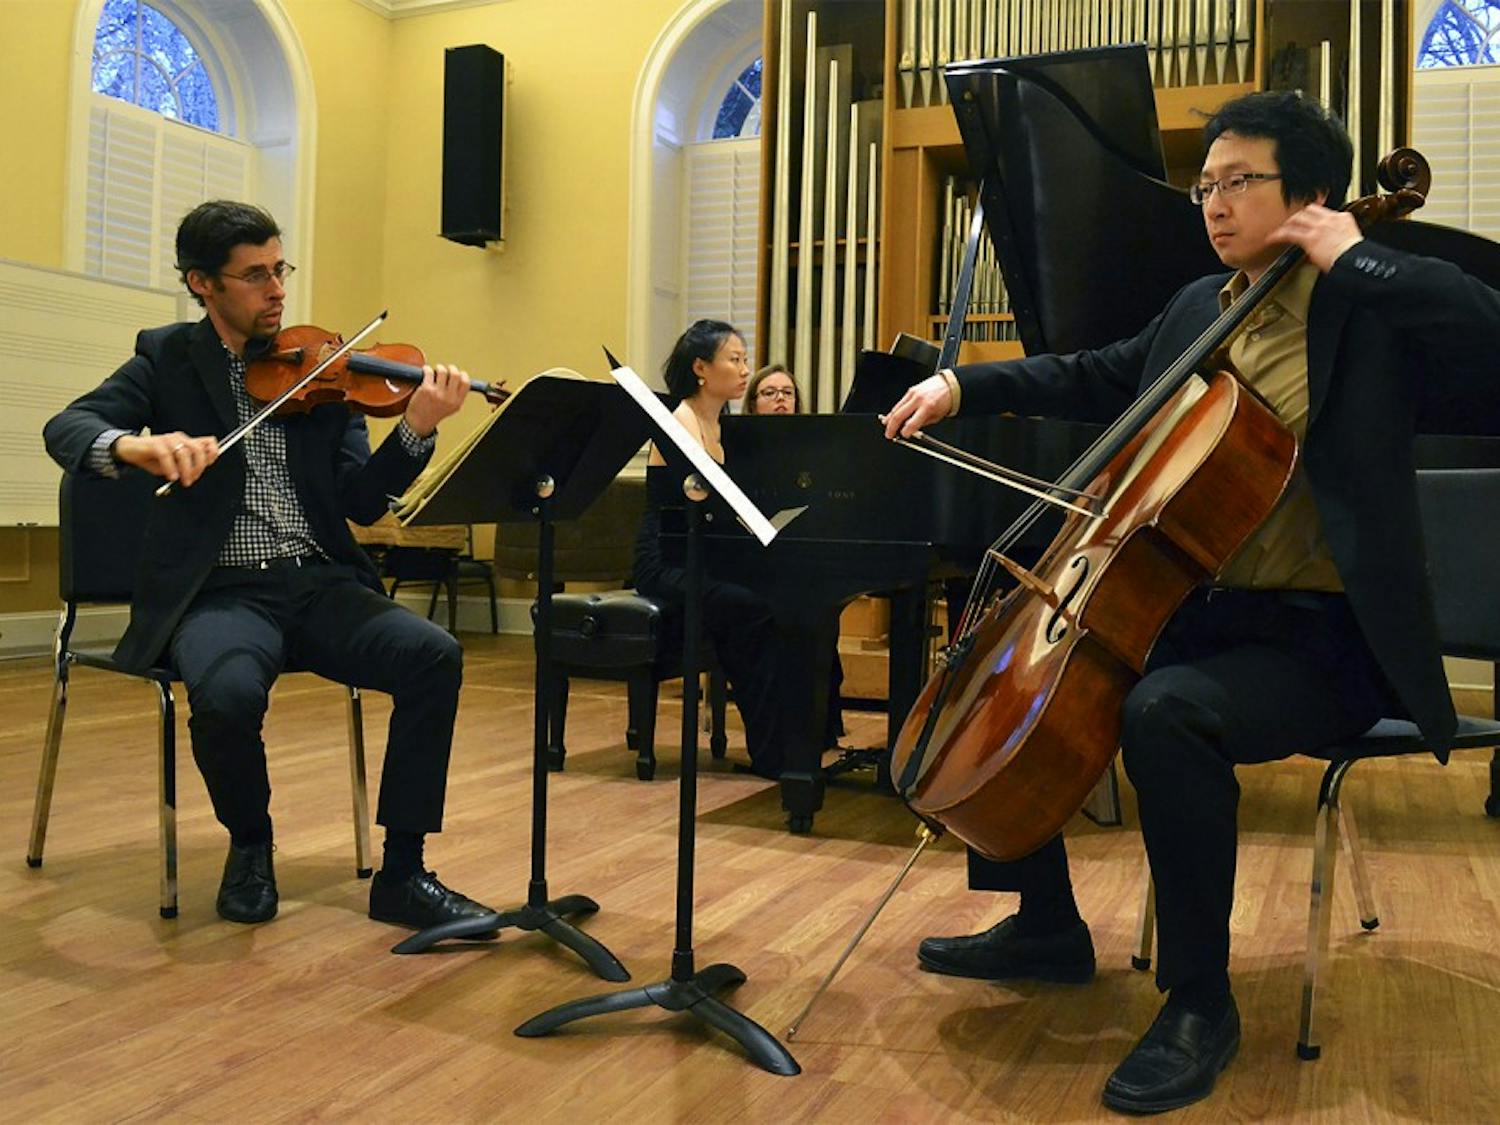 Dovid Friedlander (violin), Clara Yang (piano), and Peng Li (cello), perform at the Faculty Recital Monday evening in Person Hall.  UNC pianist, Yang, along with North Carolina Symphony musicians, Friedlander and Li, performed works by Bach, Beethoven, and Brahms.